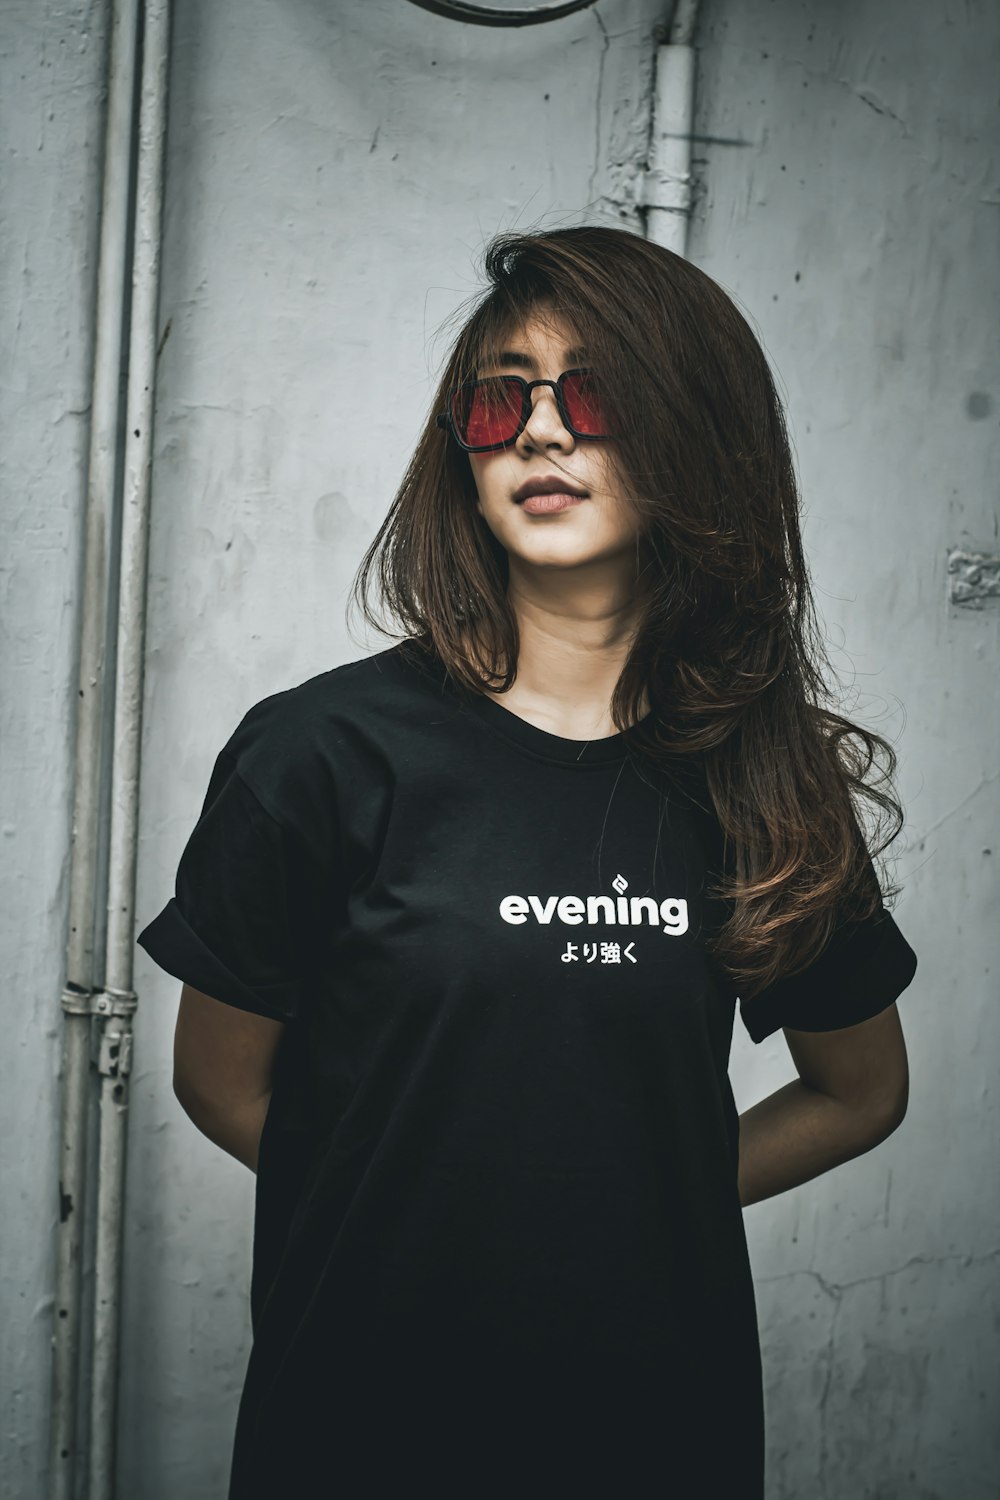 woman in black crew neck t-shirt wearing red sunglasses